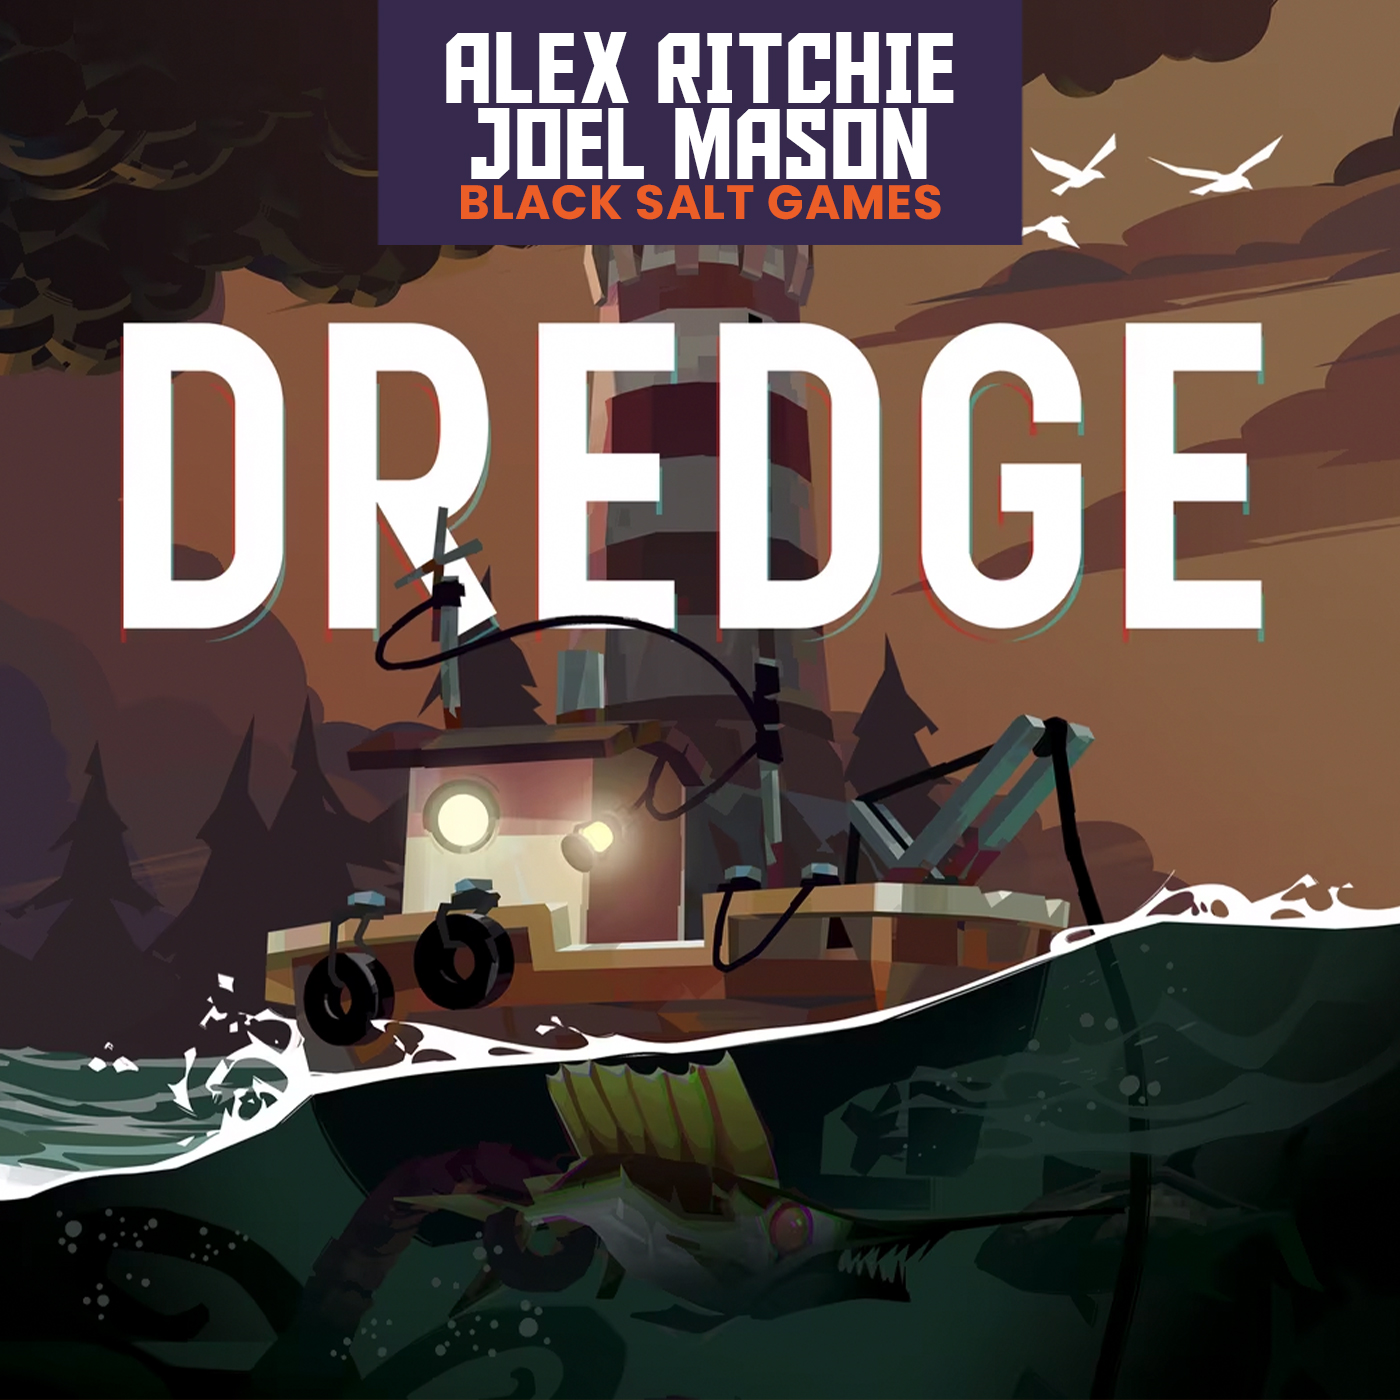 Scouring the depths of Dredge with Alex Ritchie and Joel Mason